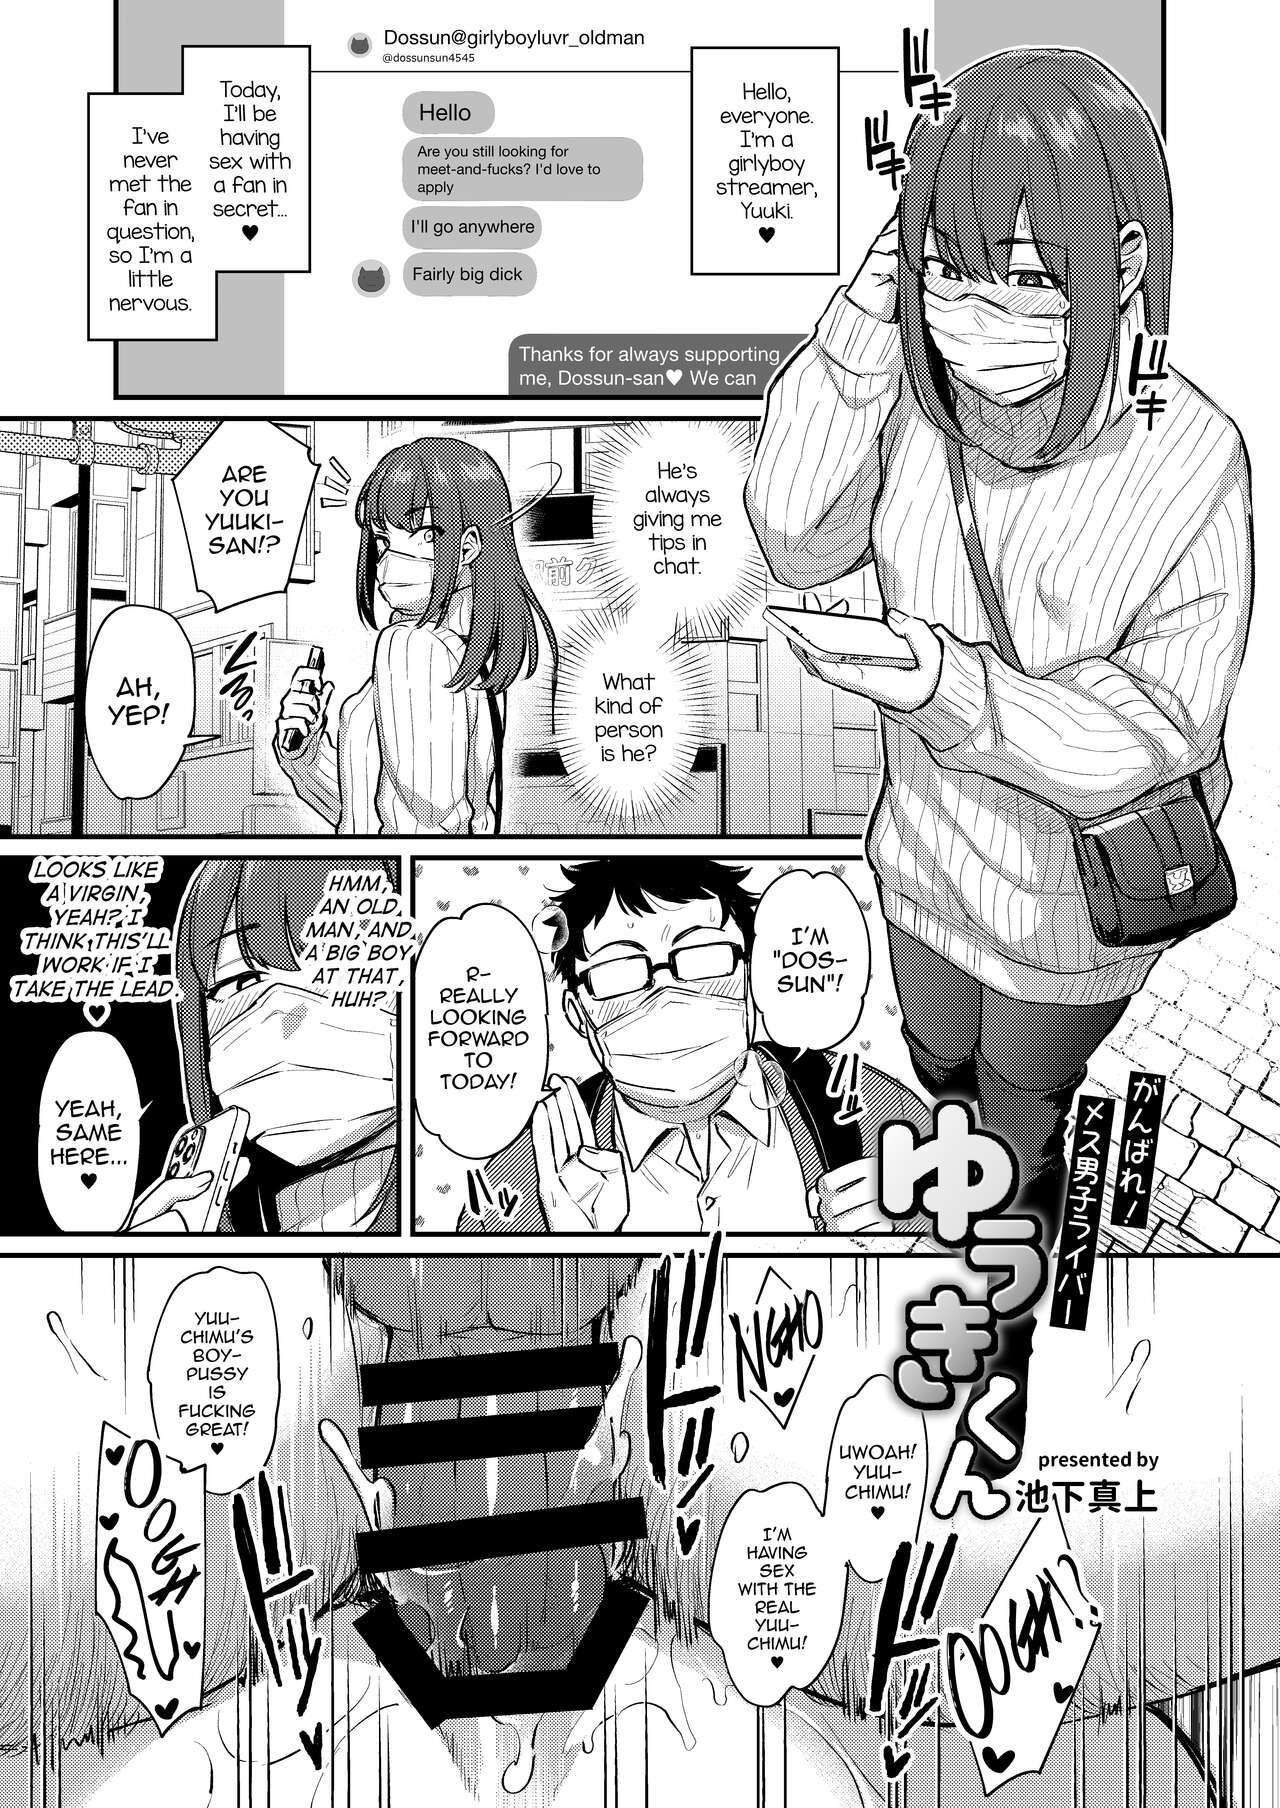 X Pages 41-52 of Shemale & Mesu Danshi Goudoushi SHEMALE C's HAVEN 2 Ngentot - Page 1